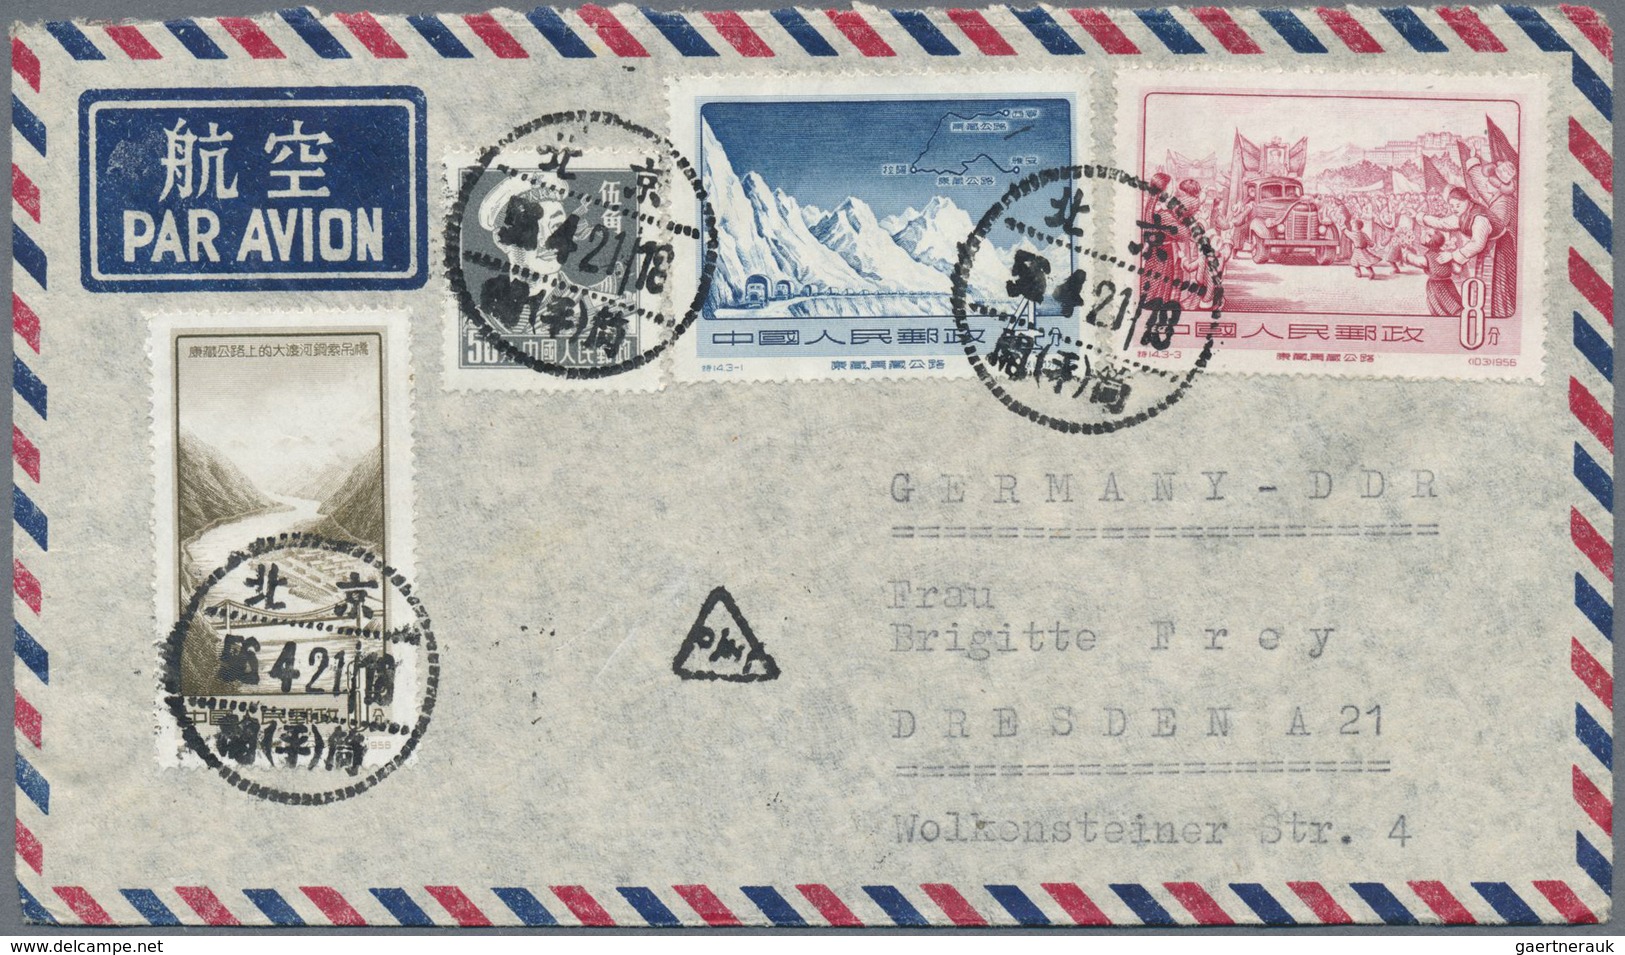 Br China - Volksrepublik: 1950/59, lot airmail covers (12) all used to East Germany inc. interesting Oc